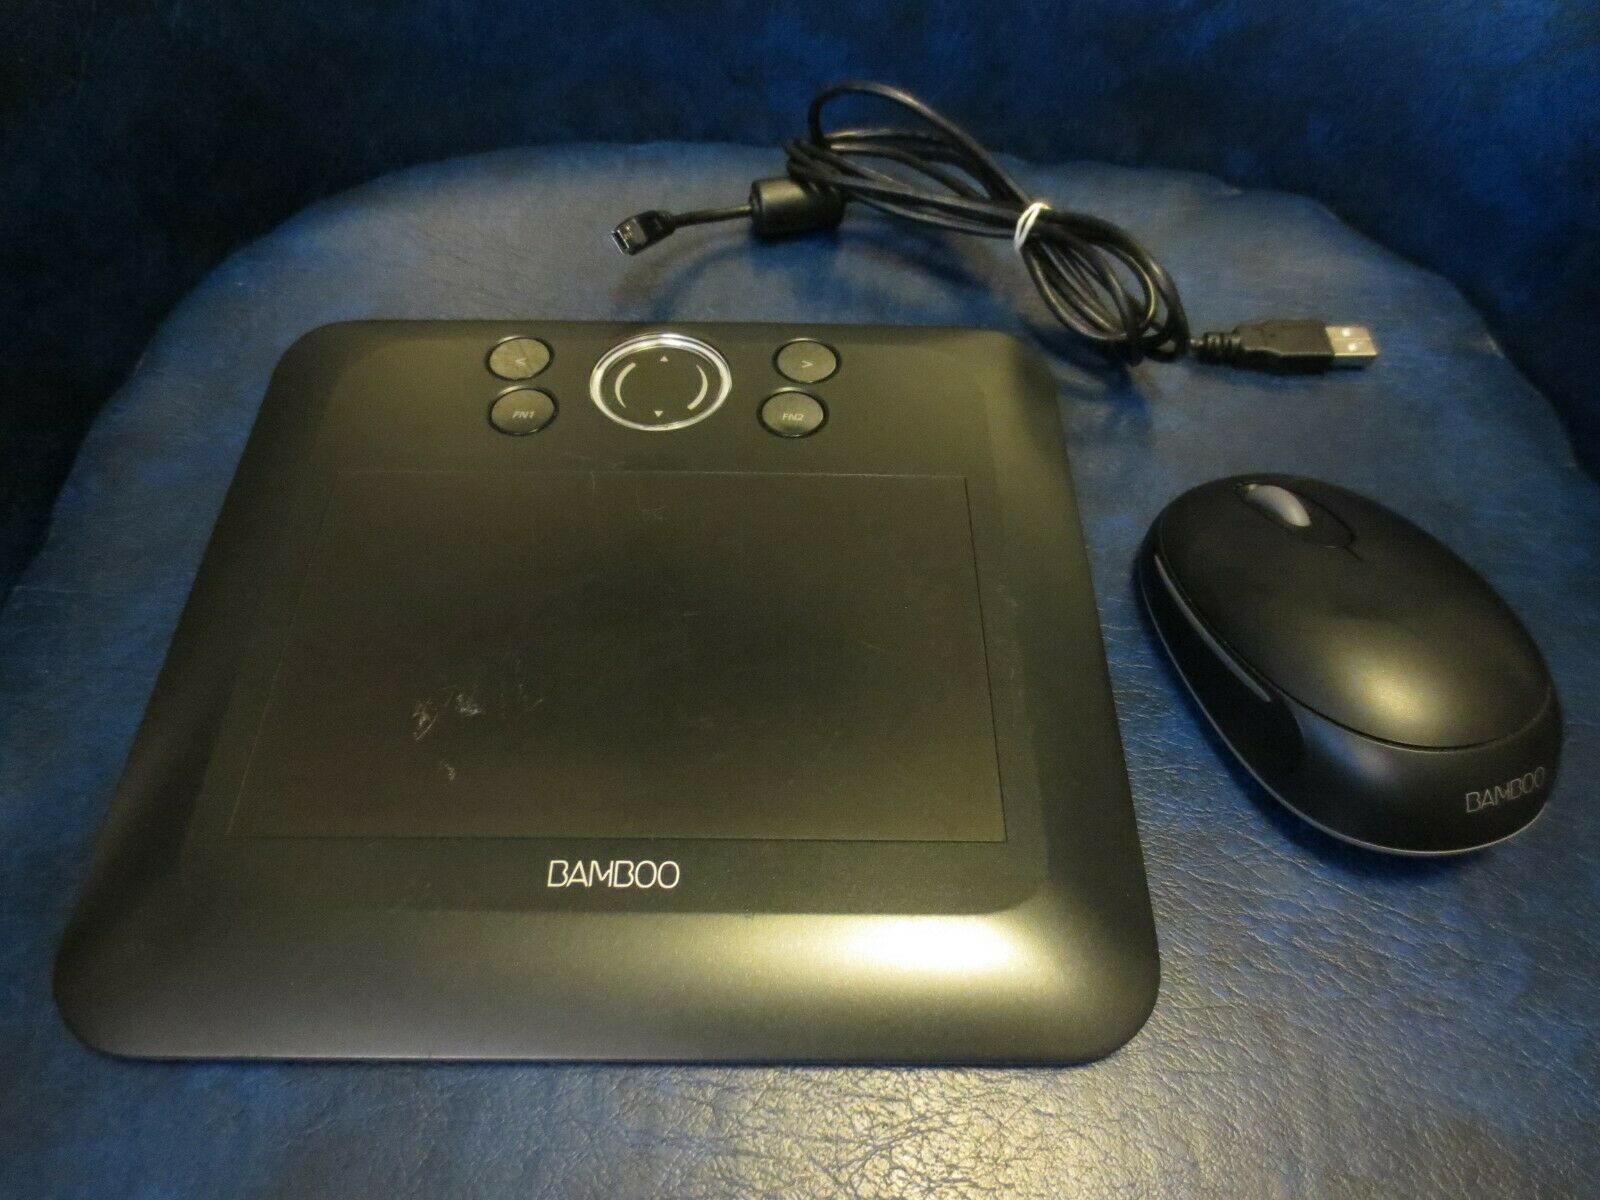 WACOM Graphics Tablet BAMBOO FUN Drawing CTE-450 Black w/ mouse and USB cable